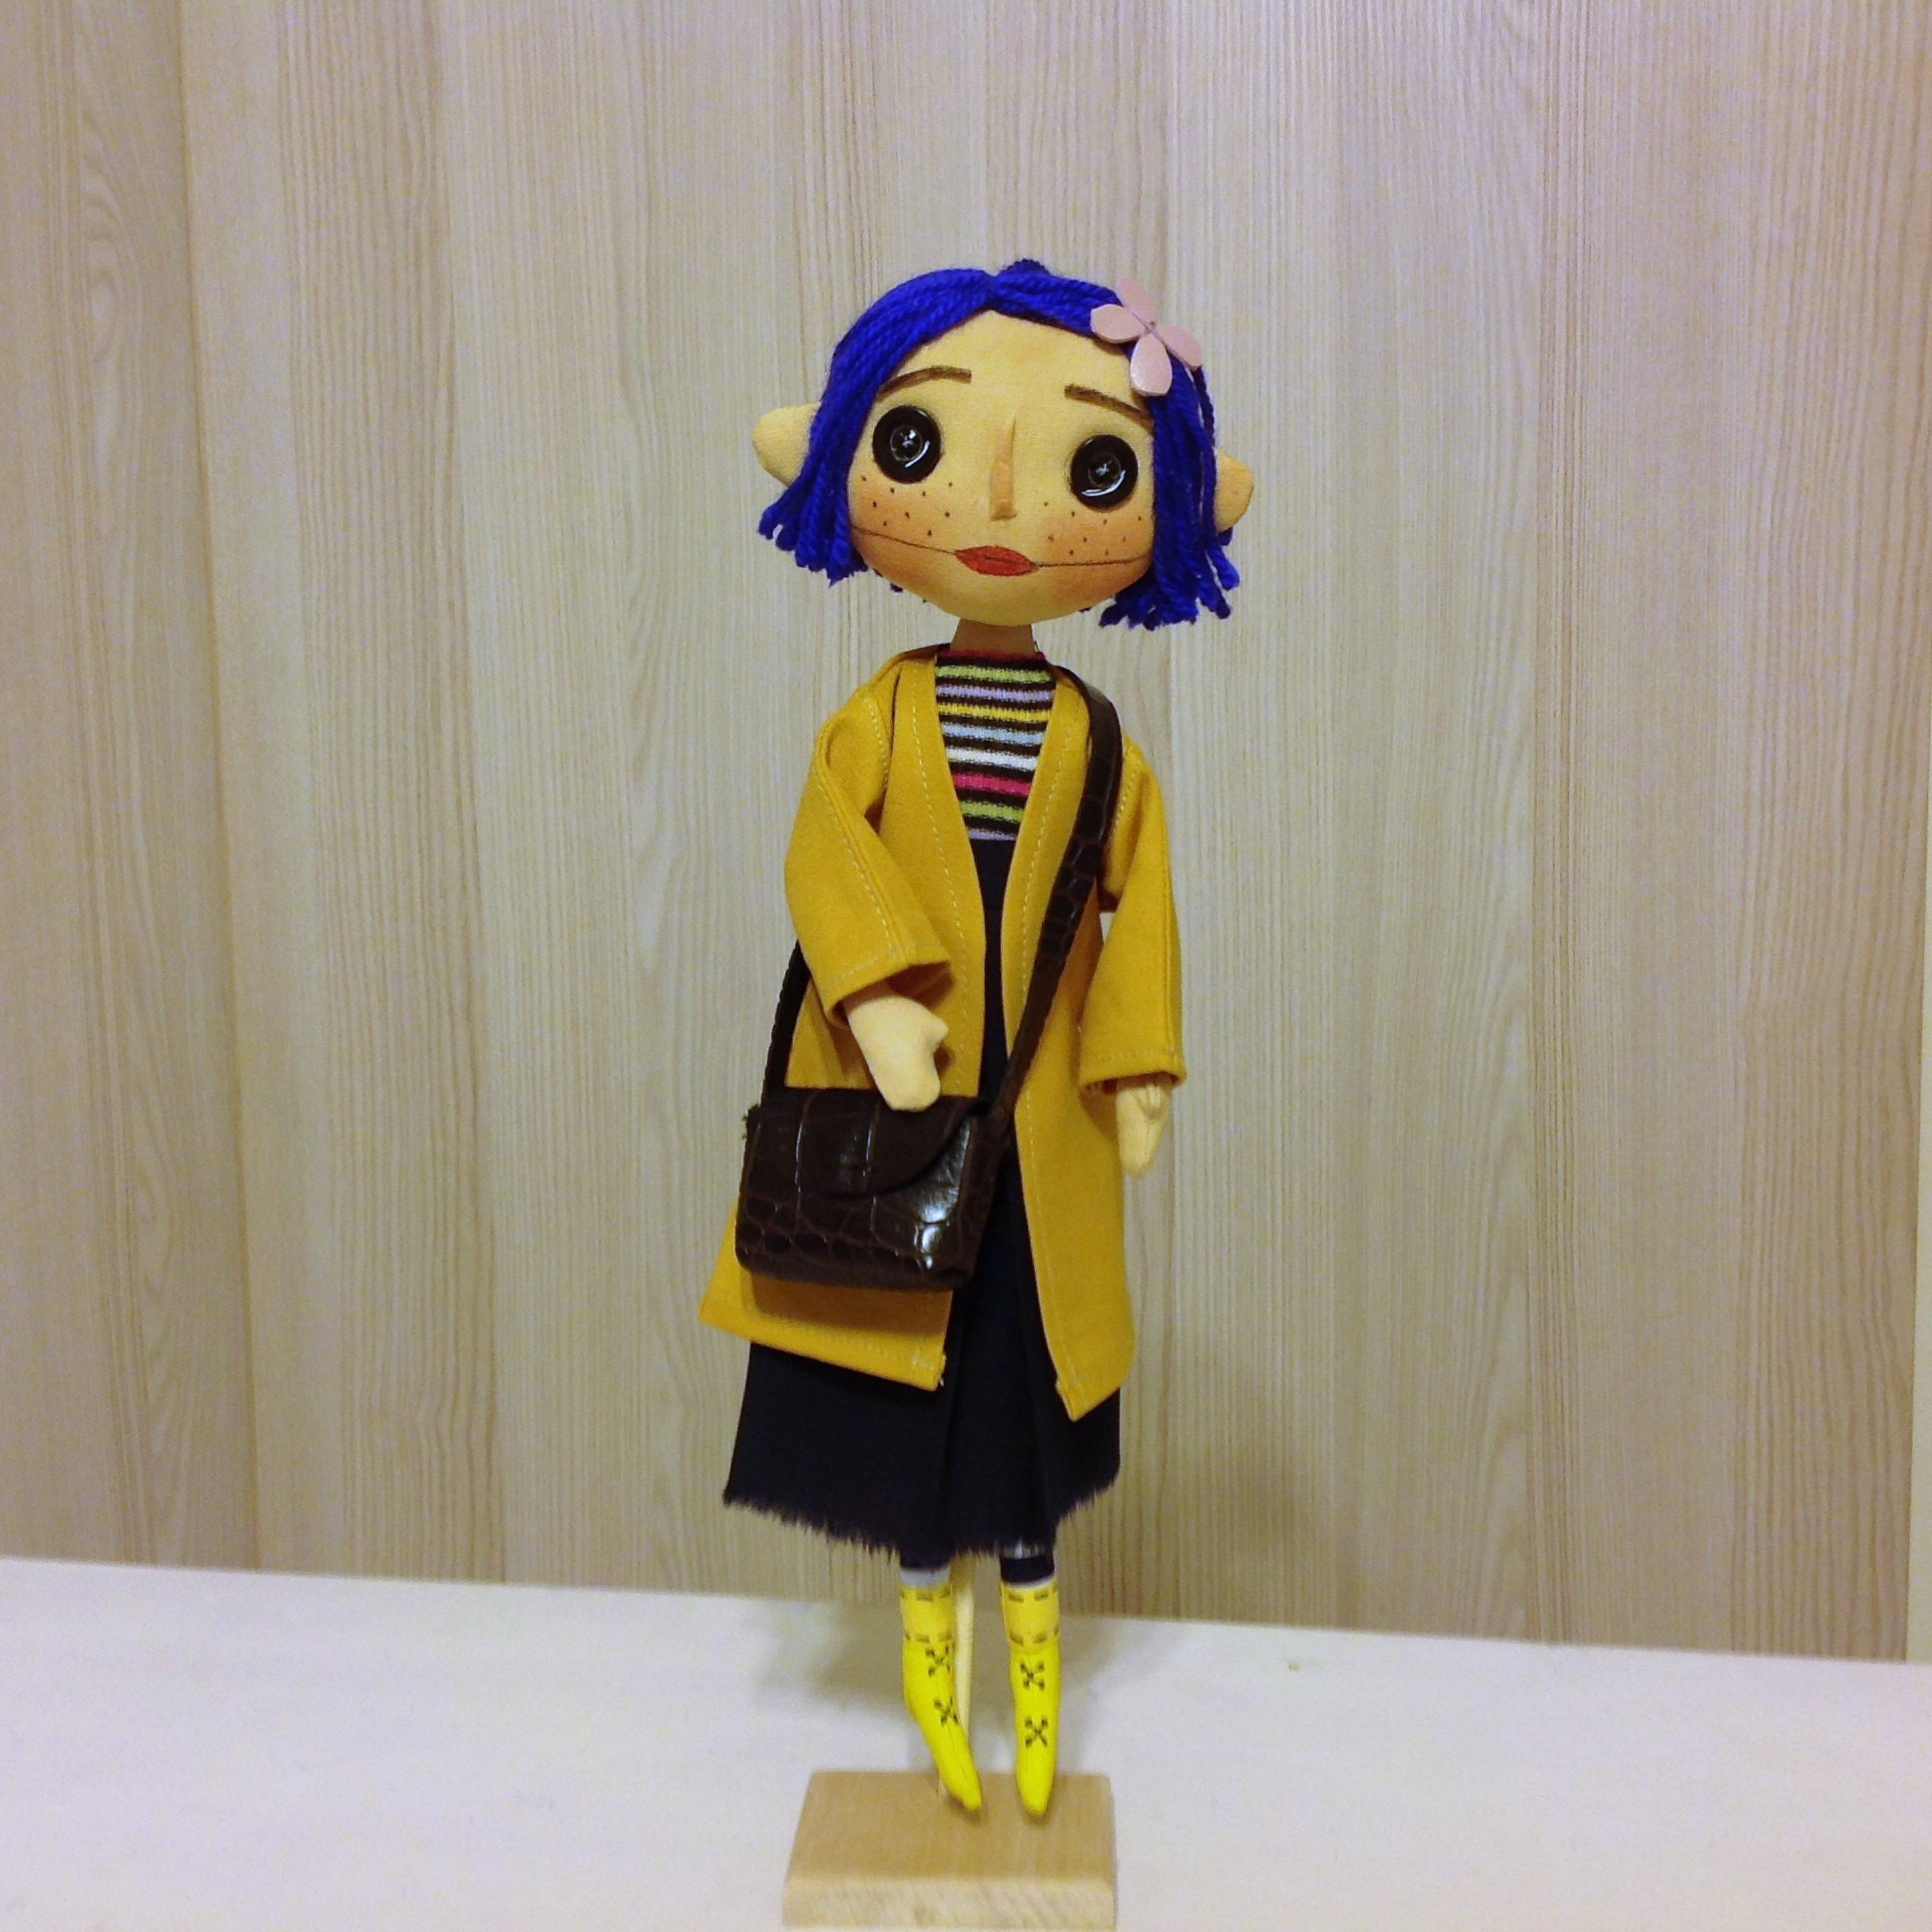 This Nerd's Yarn on X: For Christmas, I made a doll modeled after my  daughter with button eyes. I was inspired by the movie #Coraline. She  loves it so much I was